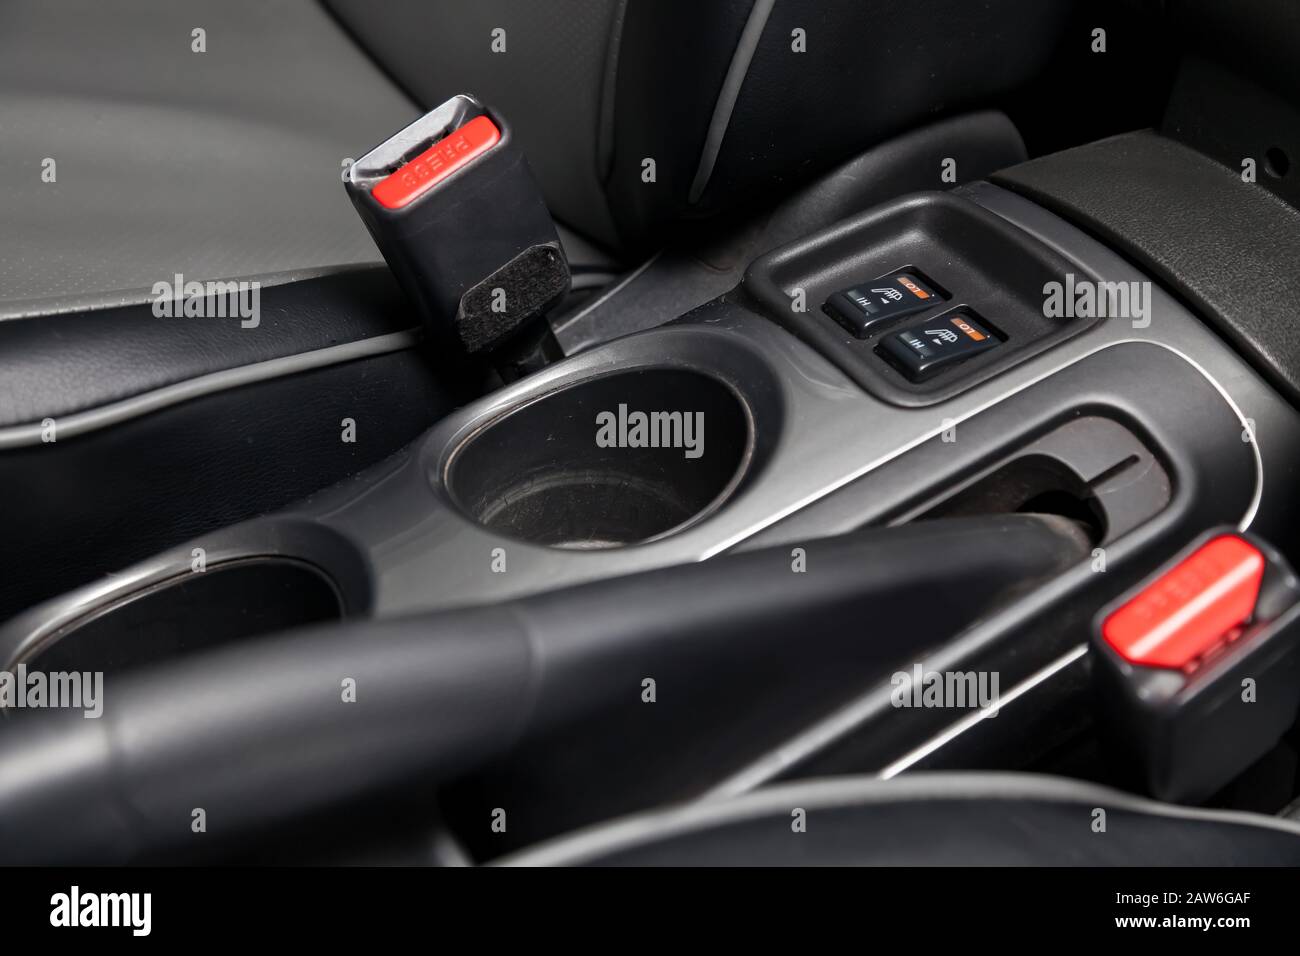 2+ Thousand Car Interior Cup Holder Royalty-Free Images, Stock